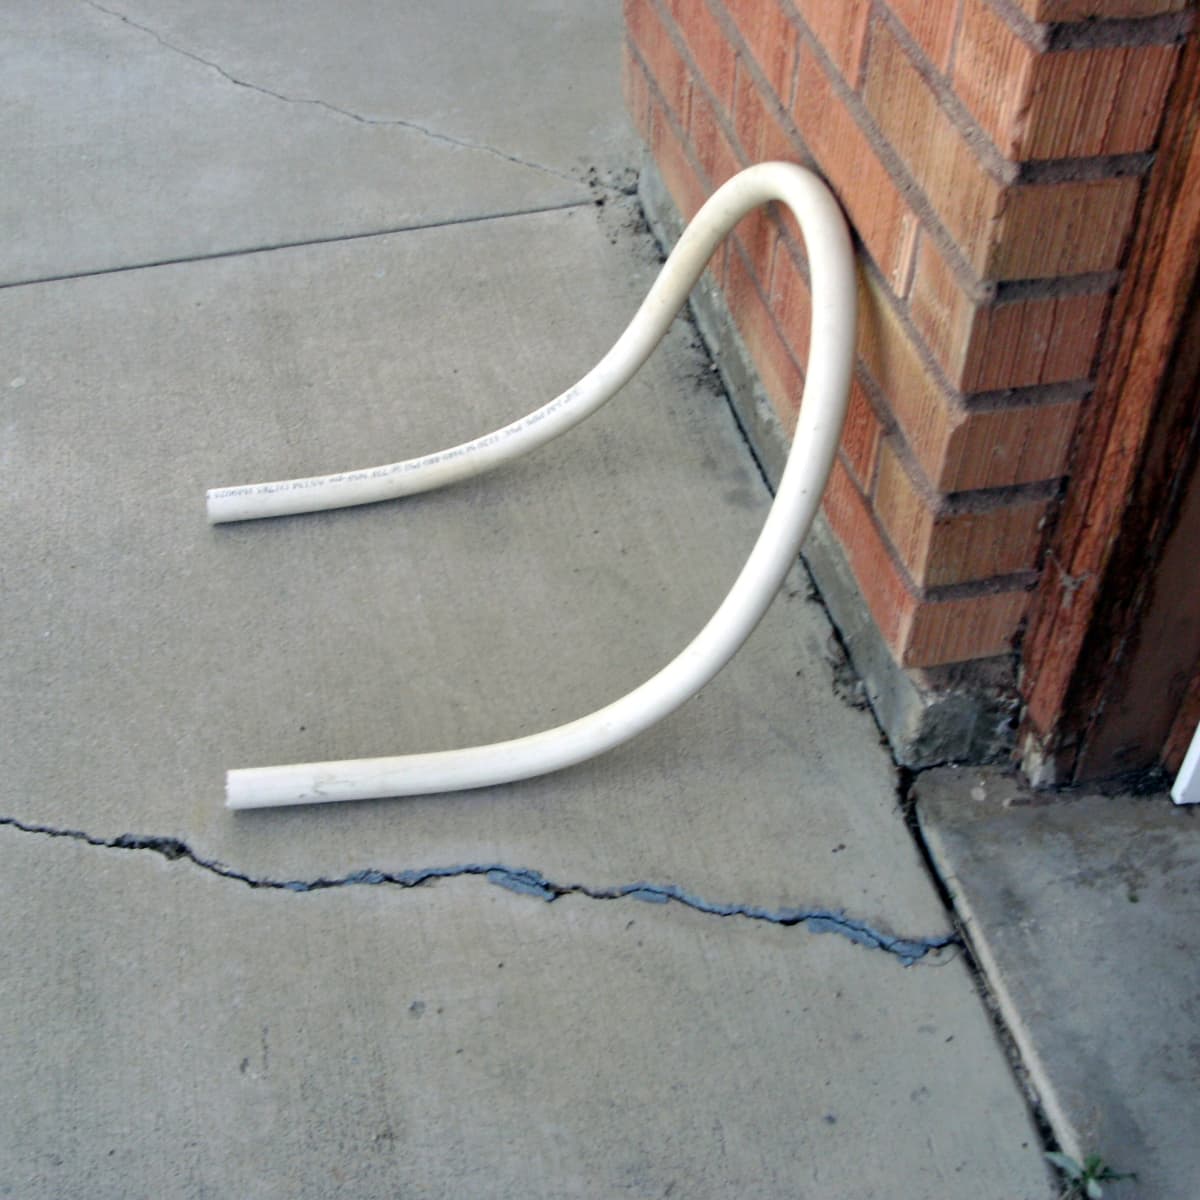 How to Bend PVC Pipe or Plastic Conduit Tube - Dengarden